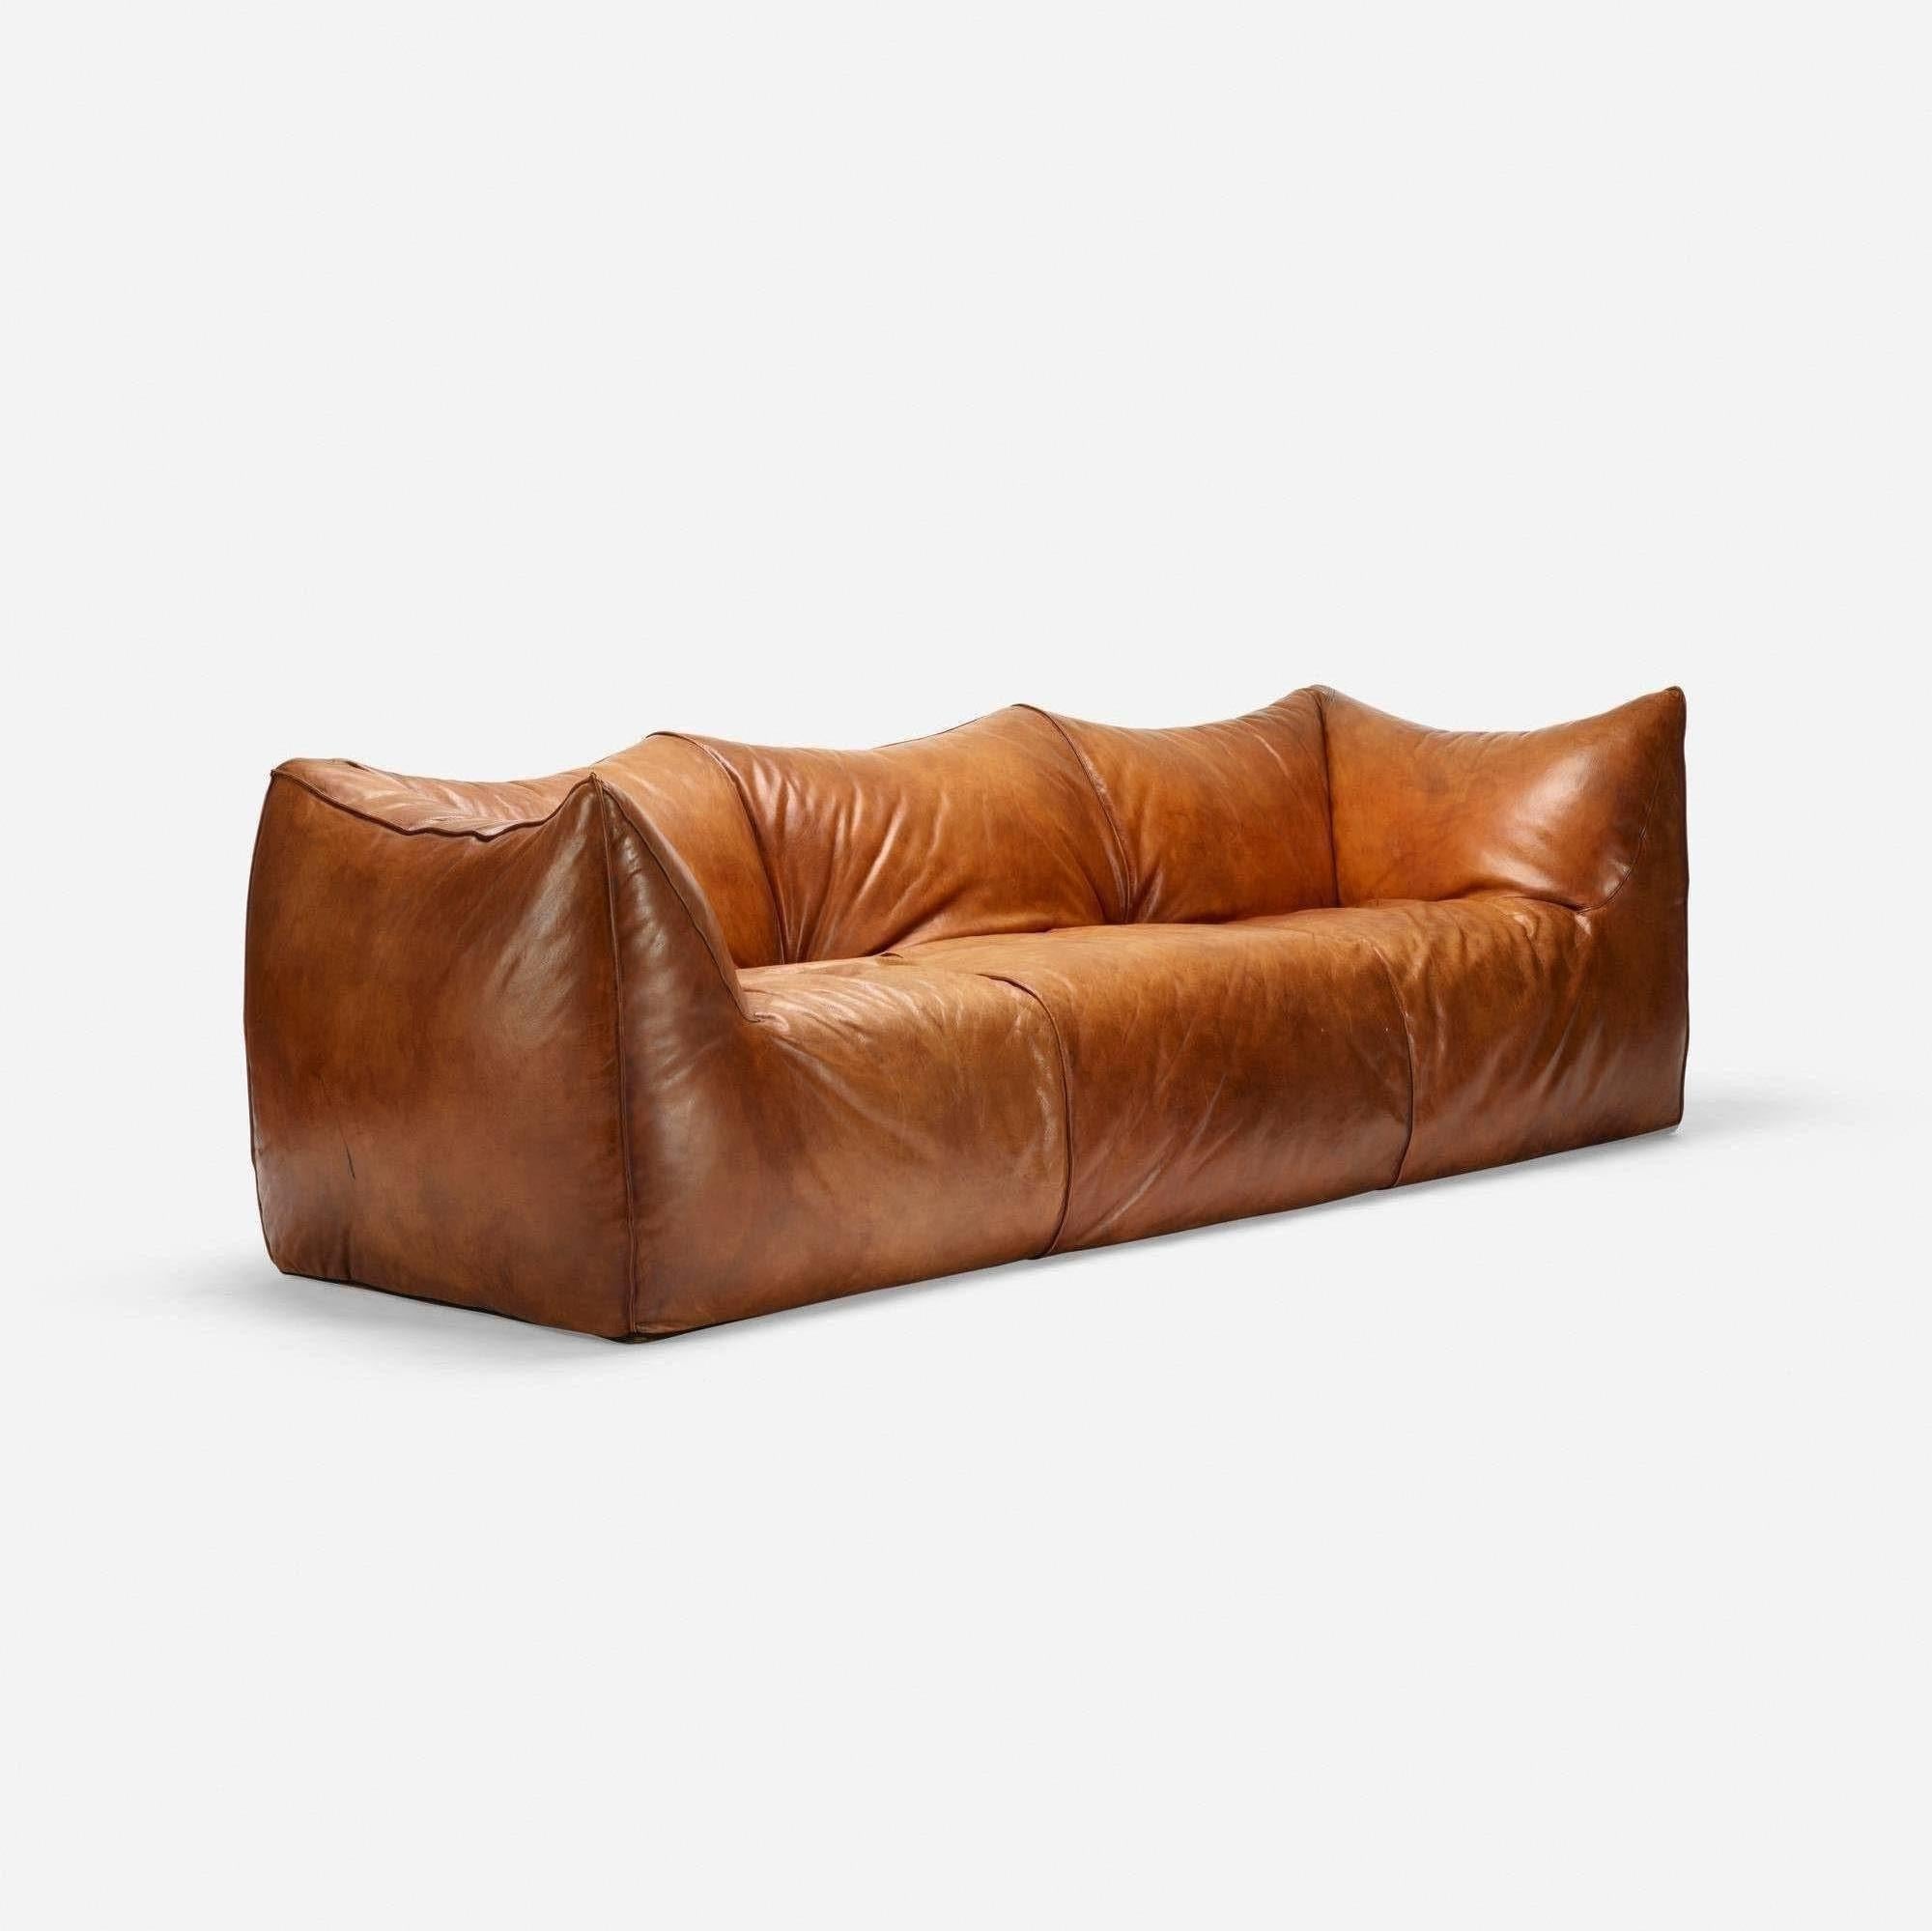 Manufactured in Italy during the 1970s. Really comfortable three-seat sofa in original thick chocolate neck leather. Almost 40 years old, but the sofa remains in good condition.